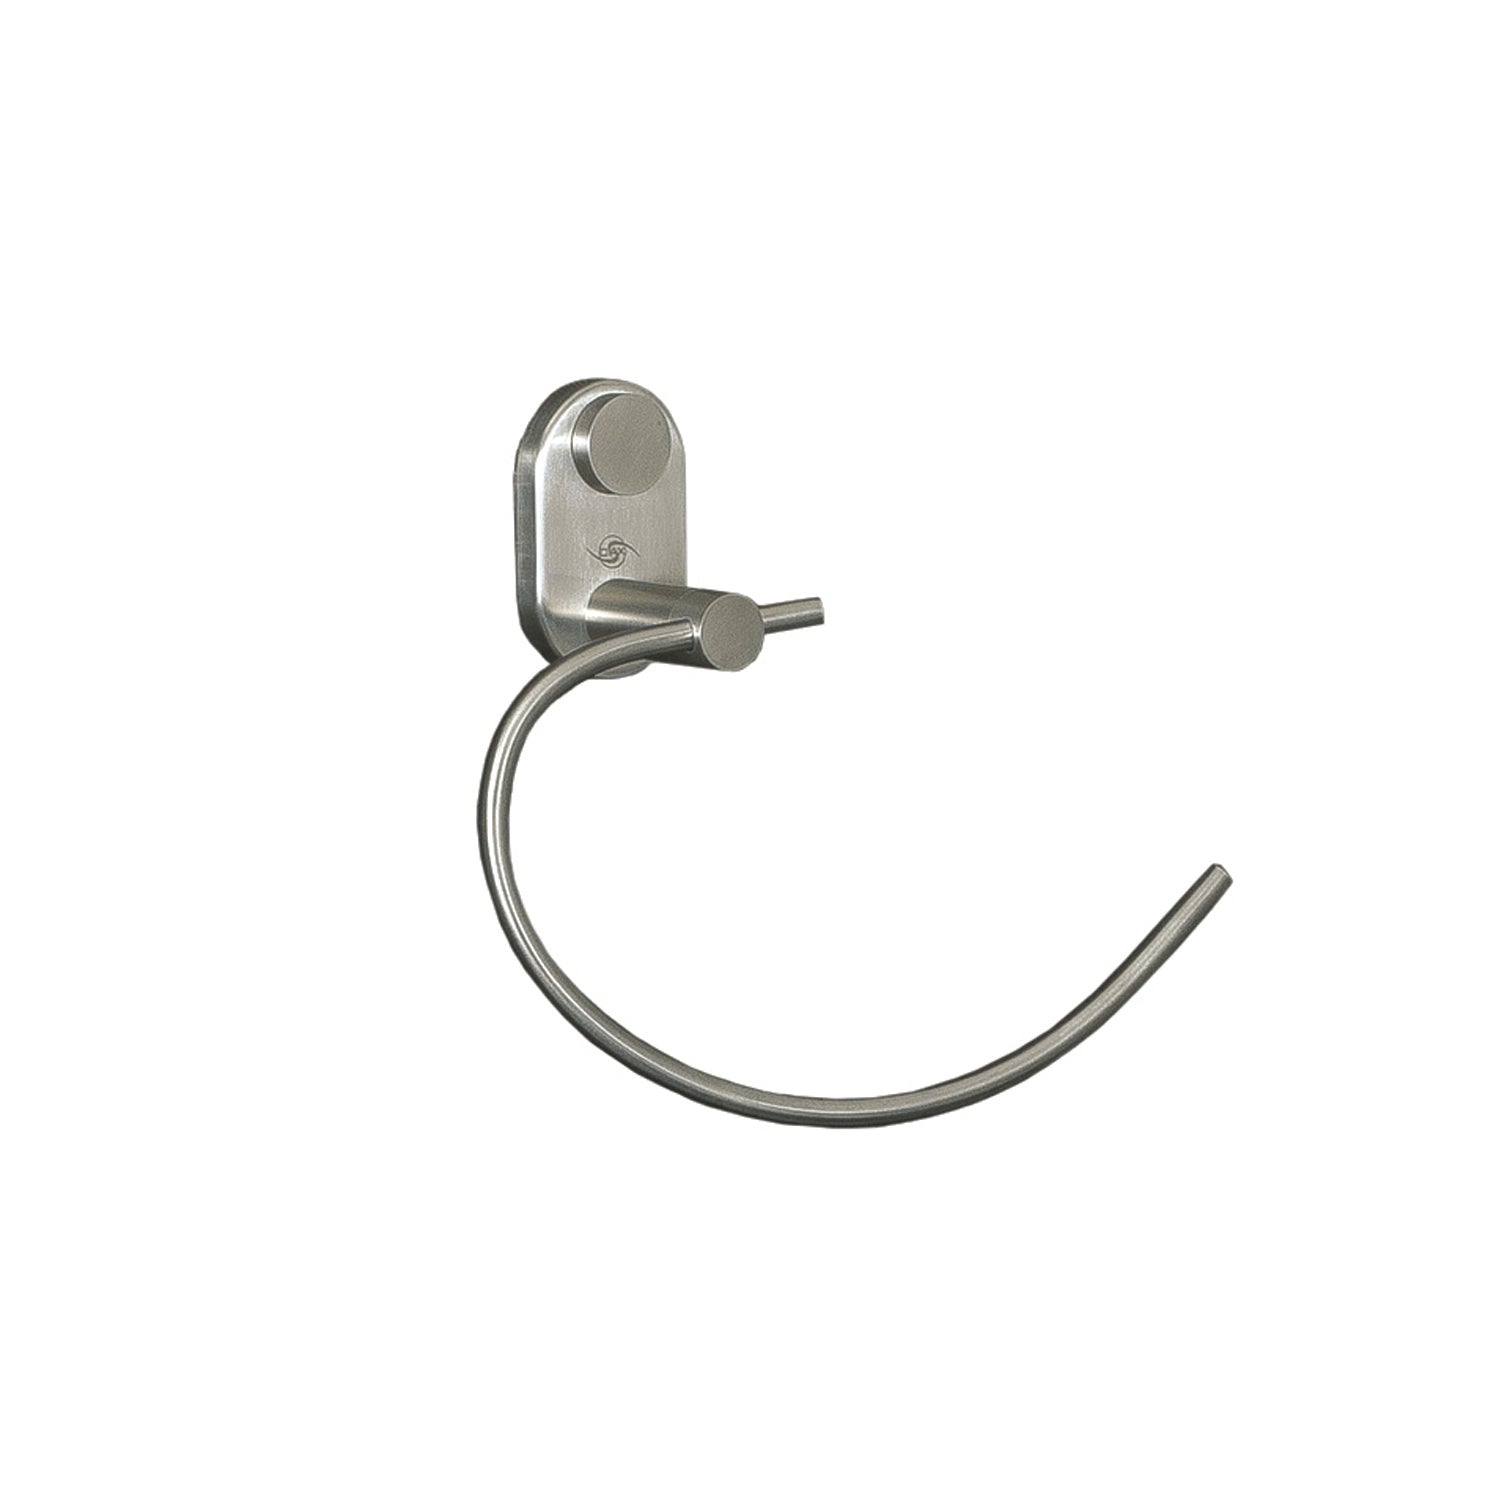 DAX Towel Ring, Wall Mount, Stainless Steel, Satin Finish, 8-1/4 x 7-3/16 x 3-1/8 Inches (DAX-G0208-S)